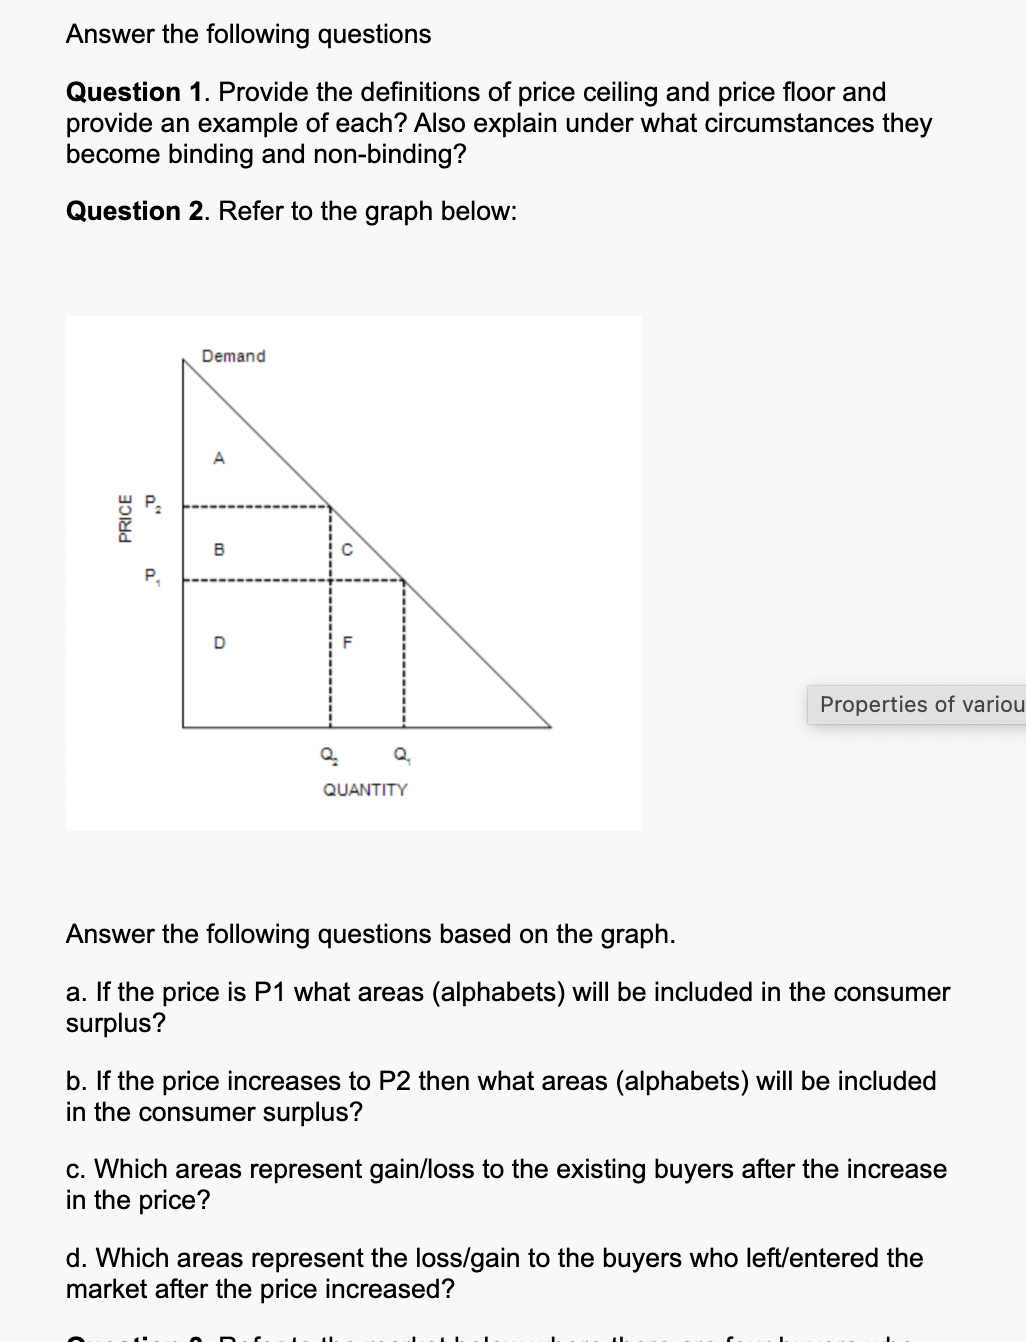 Answer the following questions
Question 1. Provide the definitions of price ceiling and price floor and
provide an example of each? Also explain under what circumstances they
become binding and non-binding?
Question 2. Refer to the graph below:
50
PRICE
a
Demand
P
B
D
Q₂
QUANTITY
Properties of variou
Answer the following questions based on the graph.
a. If the price is P1 what areas (alphabets) will be included in the consumer
surplus?
b. If the price increases to P2 then what areas (alphabets) will be included
in the consumer surplus?
c. Which areas represent gain/loss to the existing buyers after the increase
in the price?
d. Which areas represent the loss/gain to the buyers who left/entered the
market after the price increased?